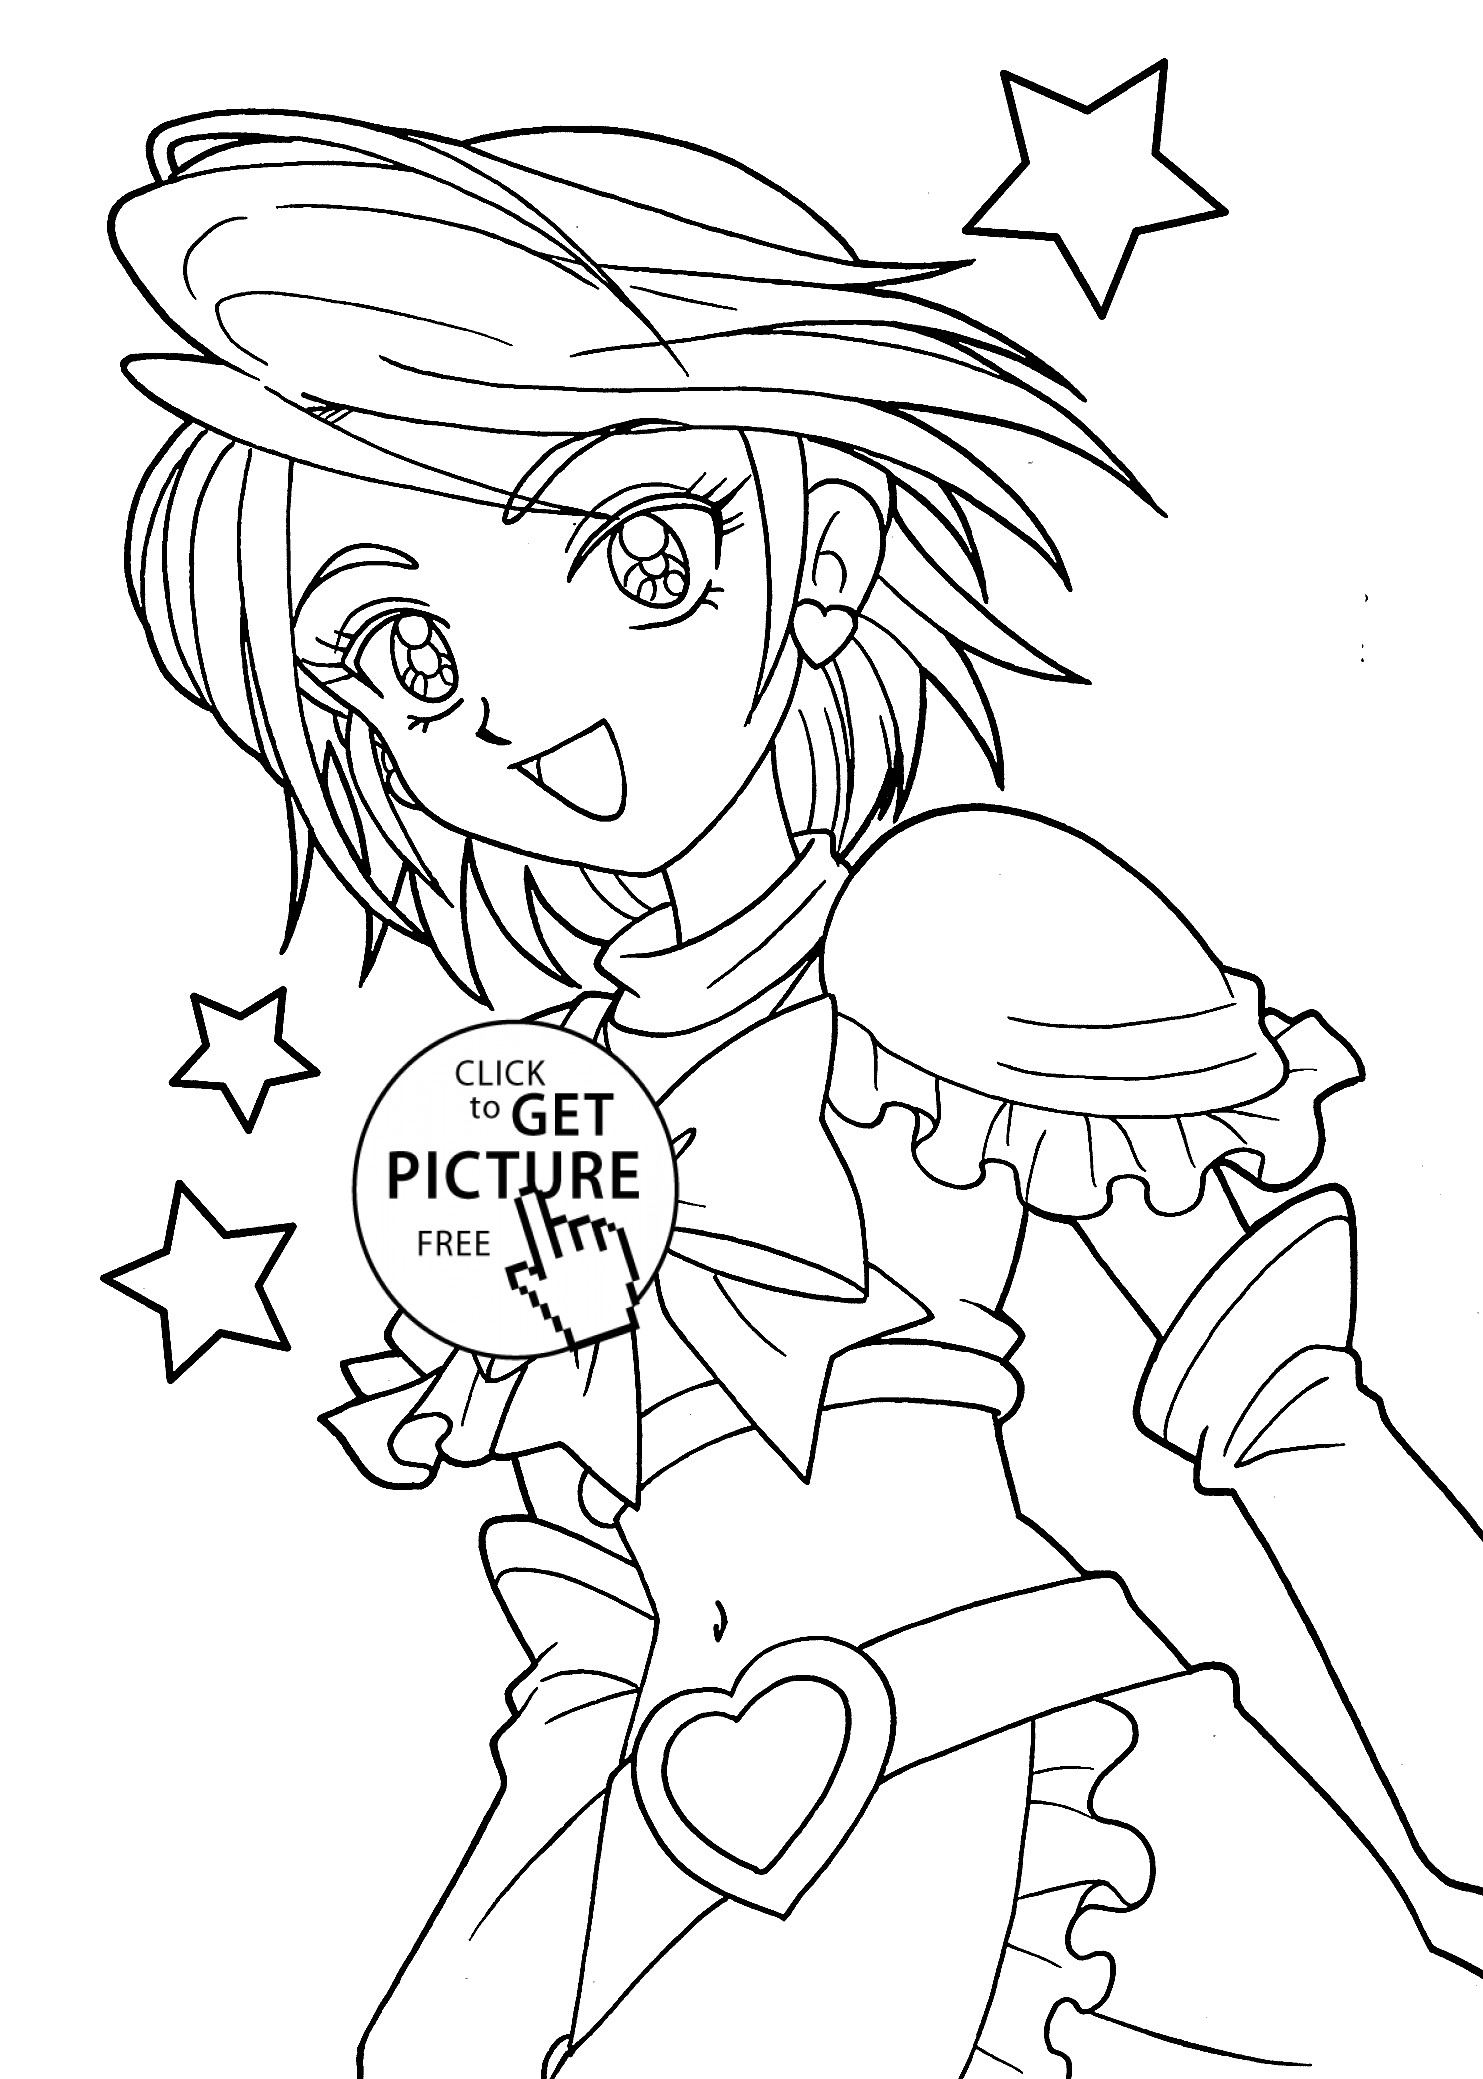 Coloring Pages For Girls Anime
 Cute Anime Girl Coloring Pages to Print